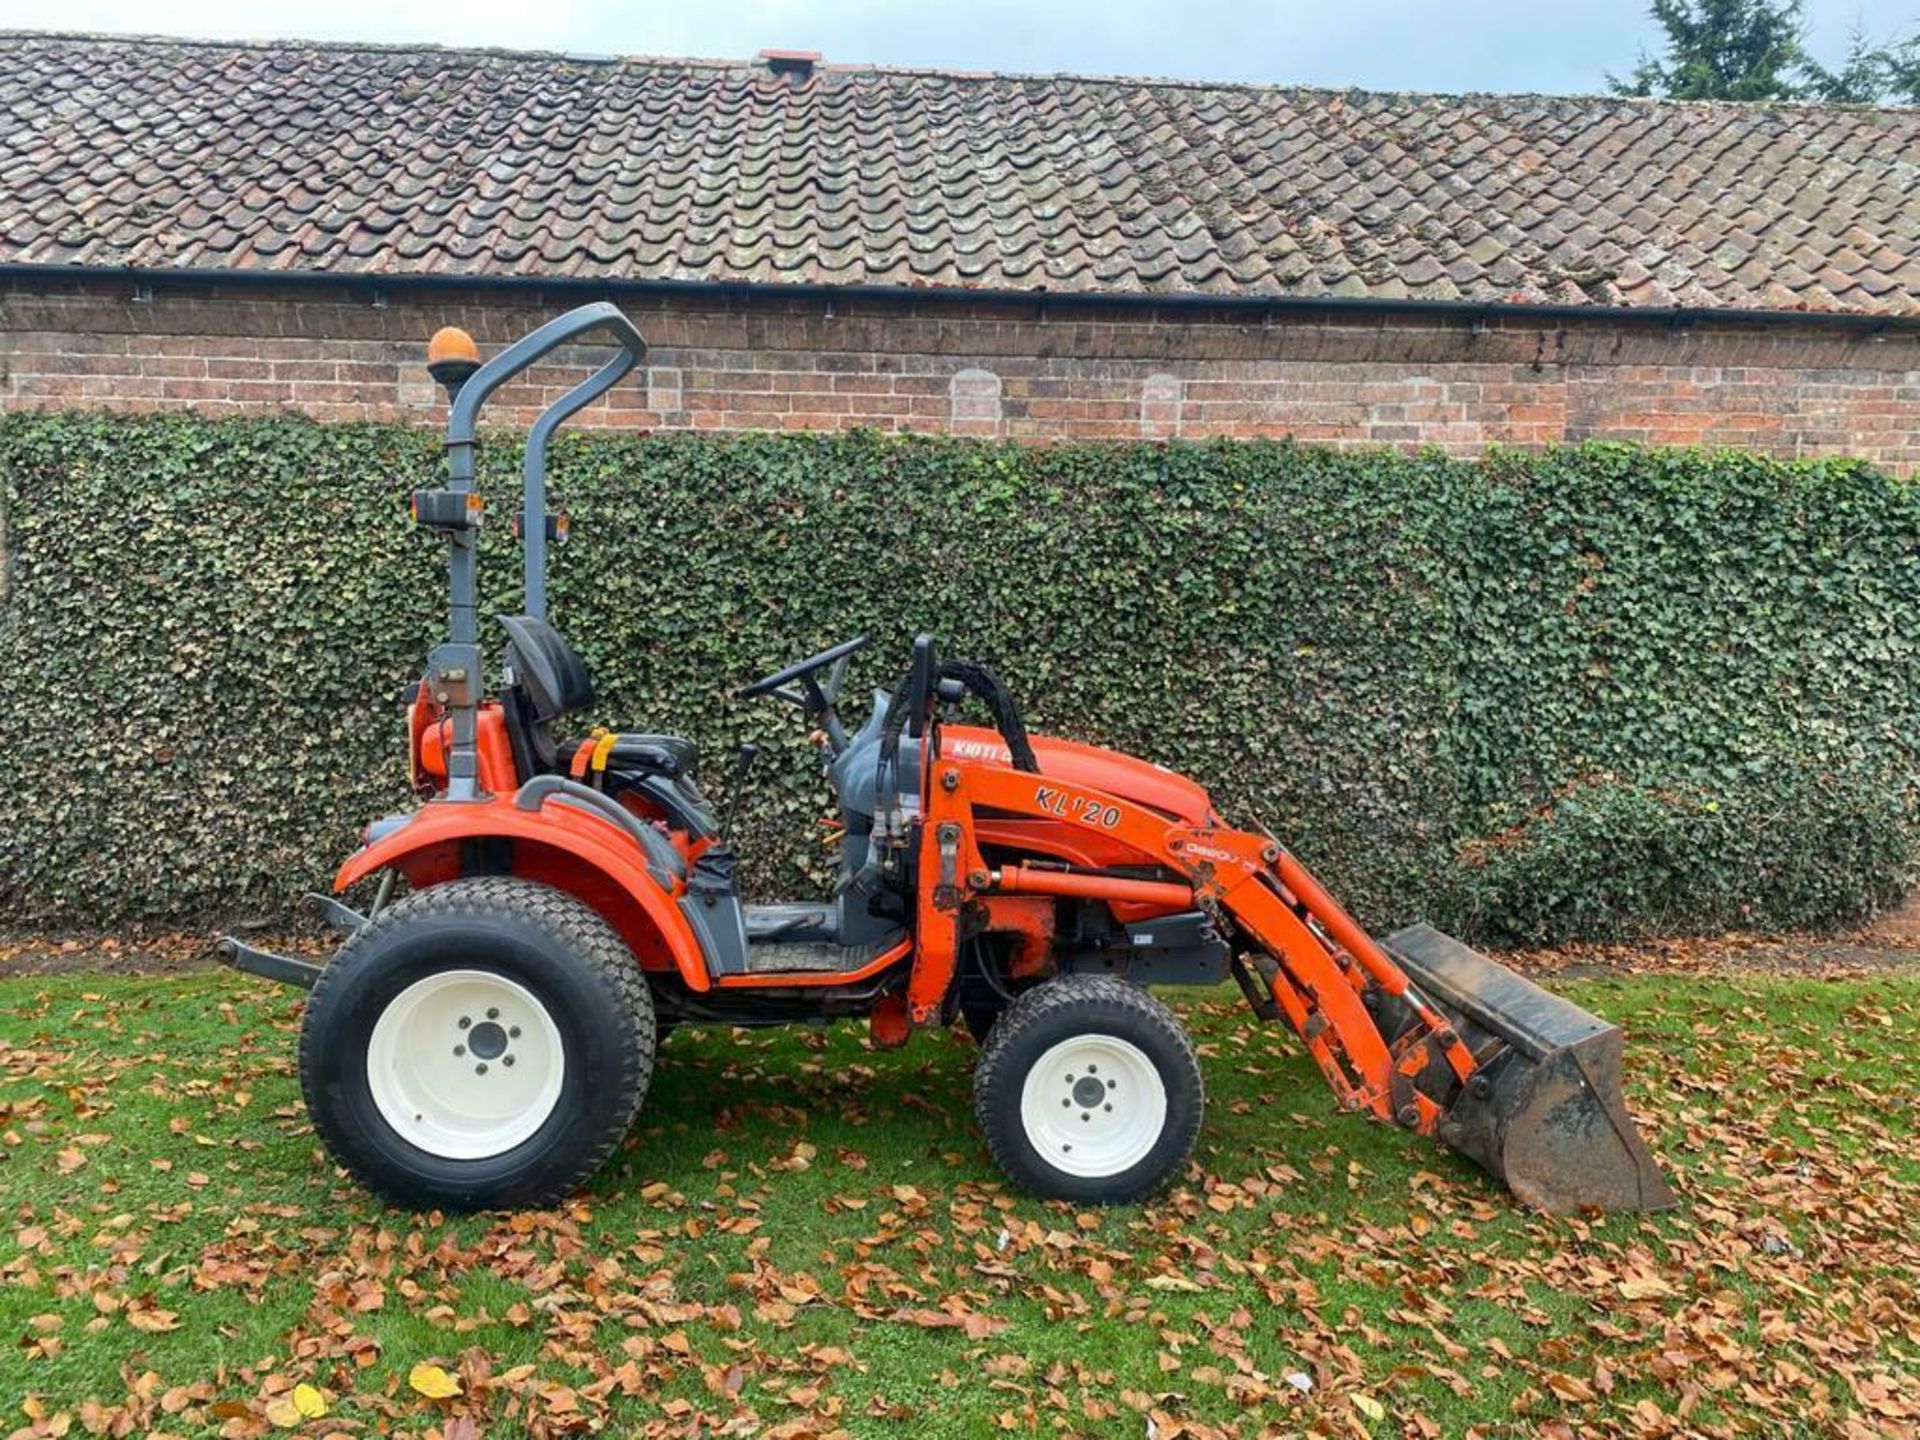 COMPACT TRACTOR KIOTI CK22 COMPLETE WITH FRONT LOADER, 4 X 4, HYDROSTATIC DRIVE *PLUS VAT* - Image 3 of 10